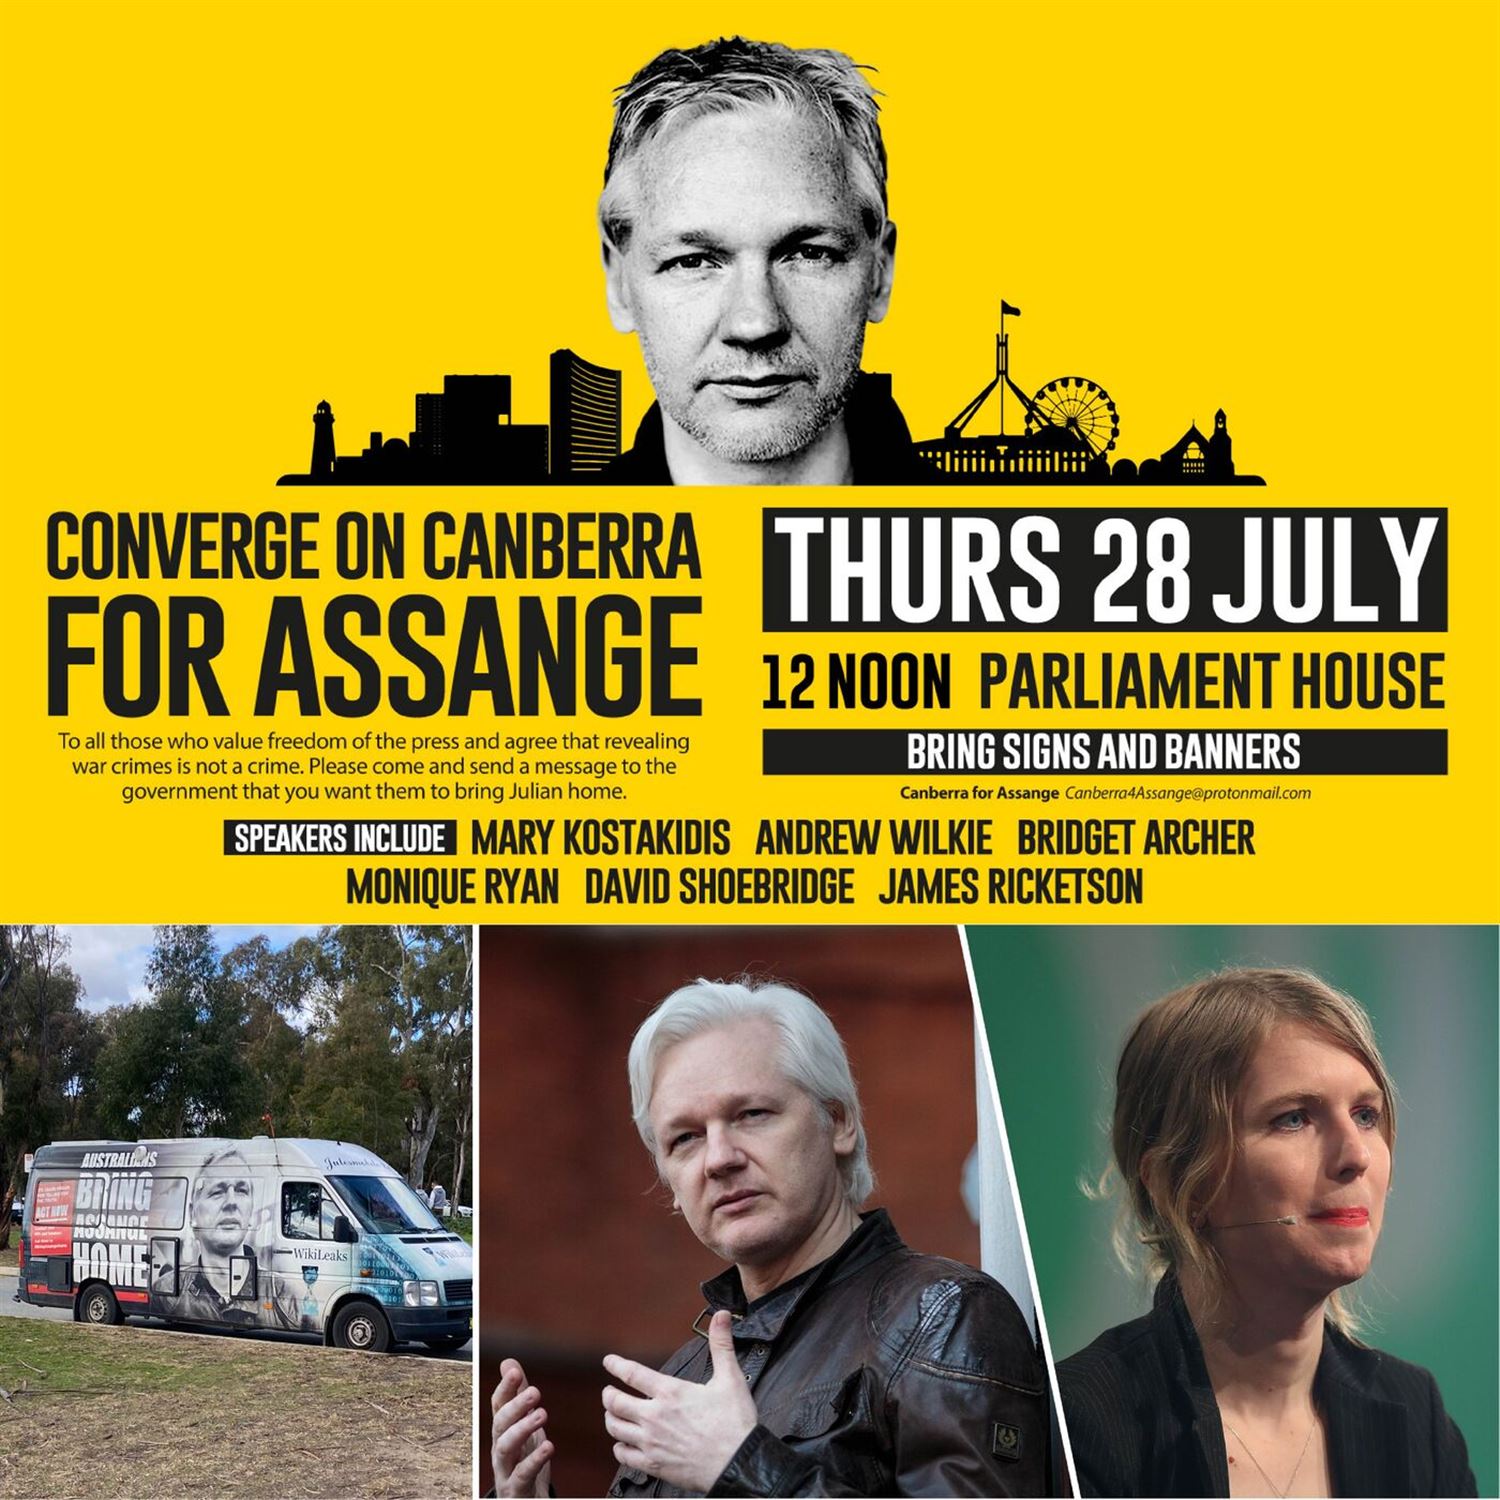 Julian Assange protest against his extradition